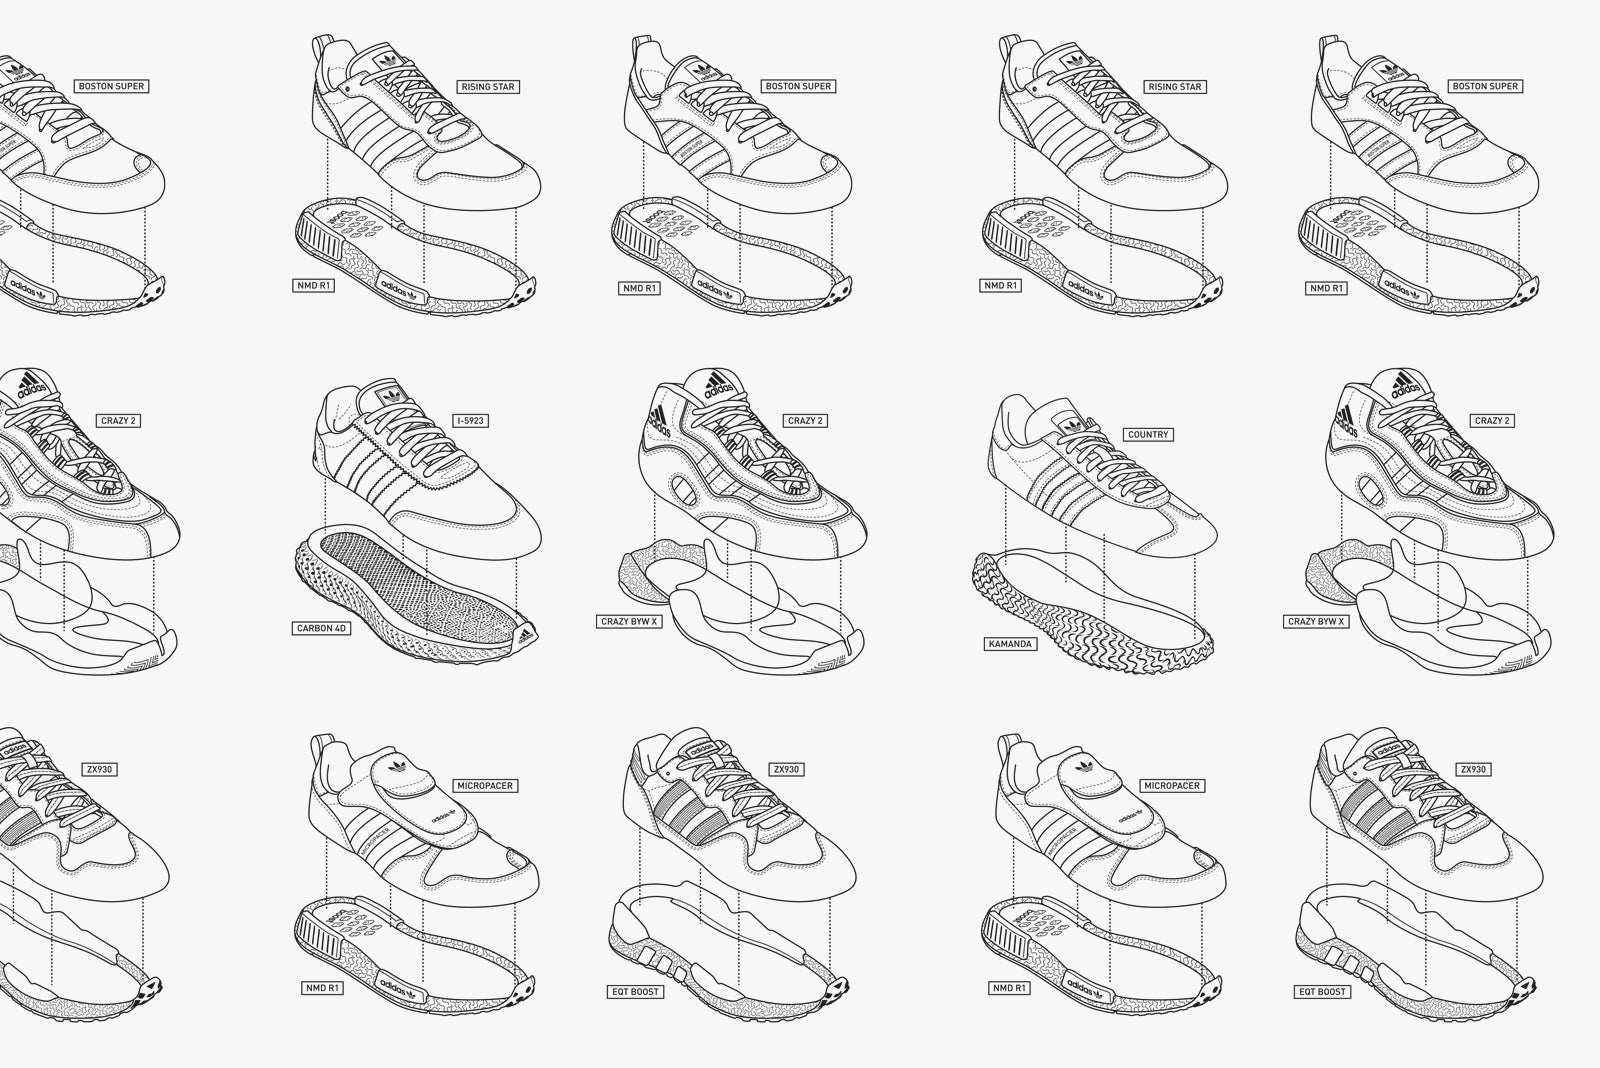 Adidas Shoes 80 OFF adidas coloring pages shoe 2020 Check more at  coloring Adidas Adidasshoes sh  Adidas outfit shoes Adidas shoes  Sneakers drawing